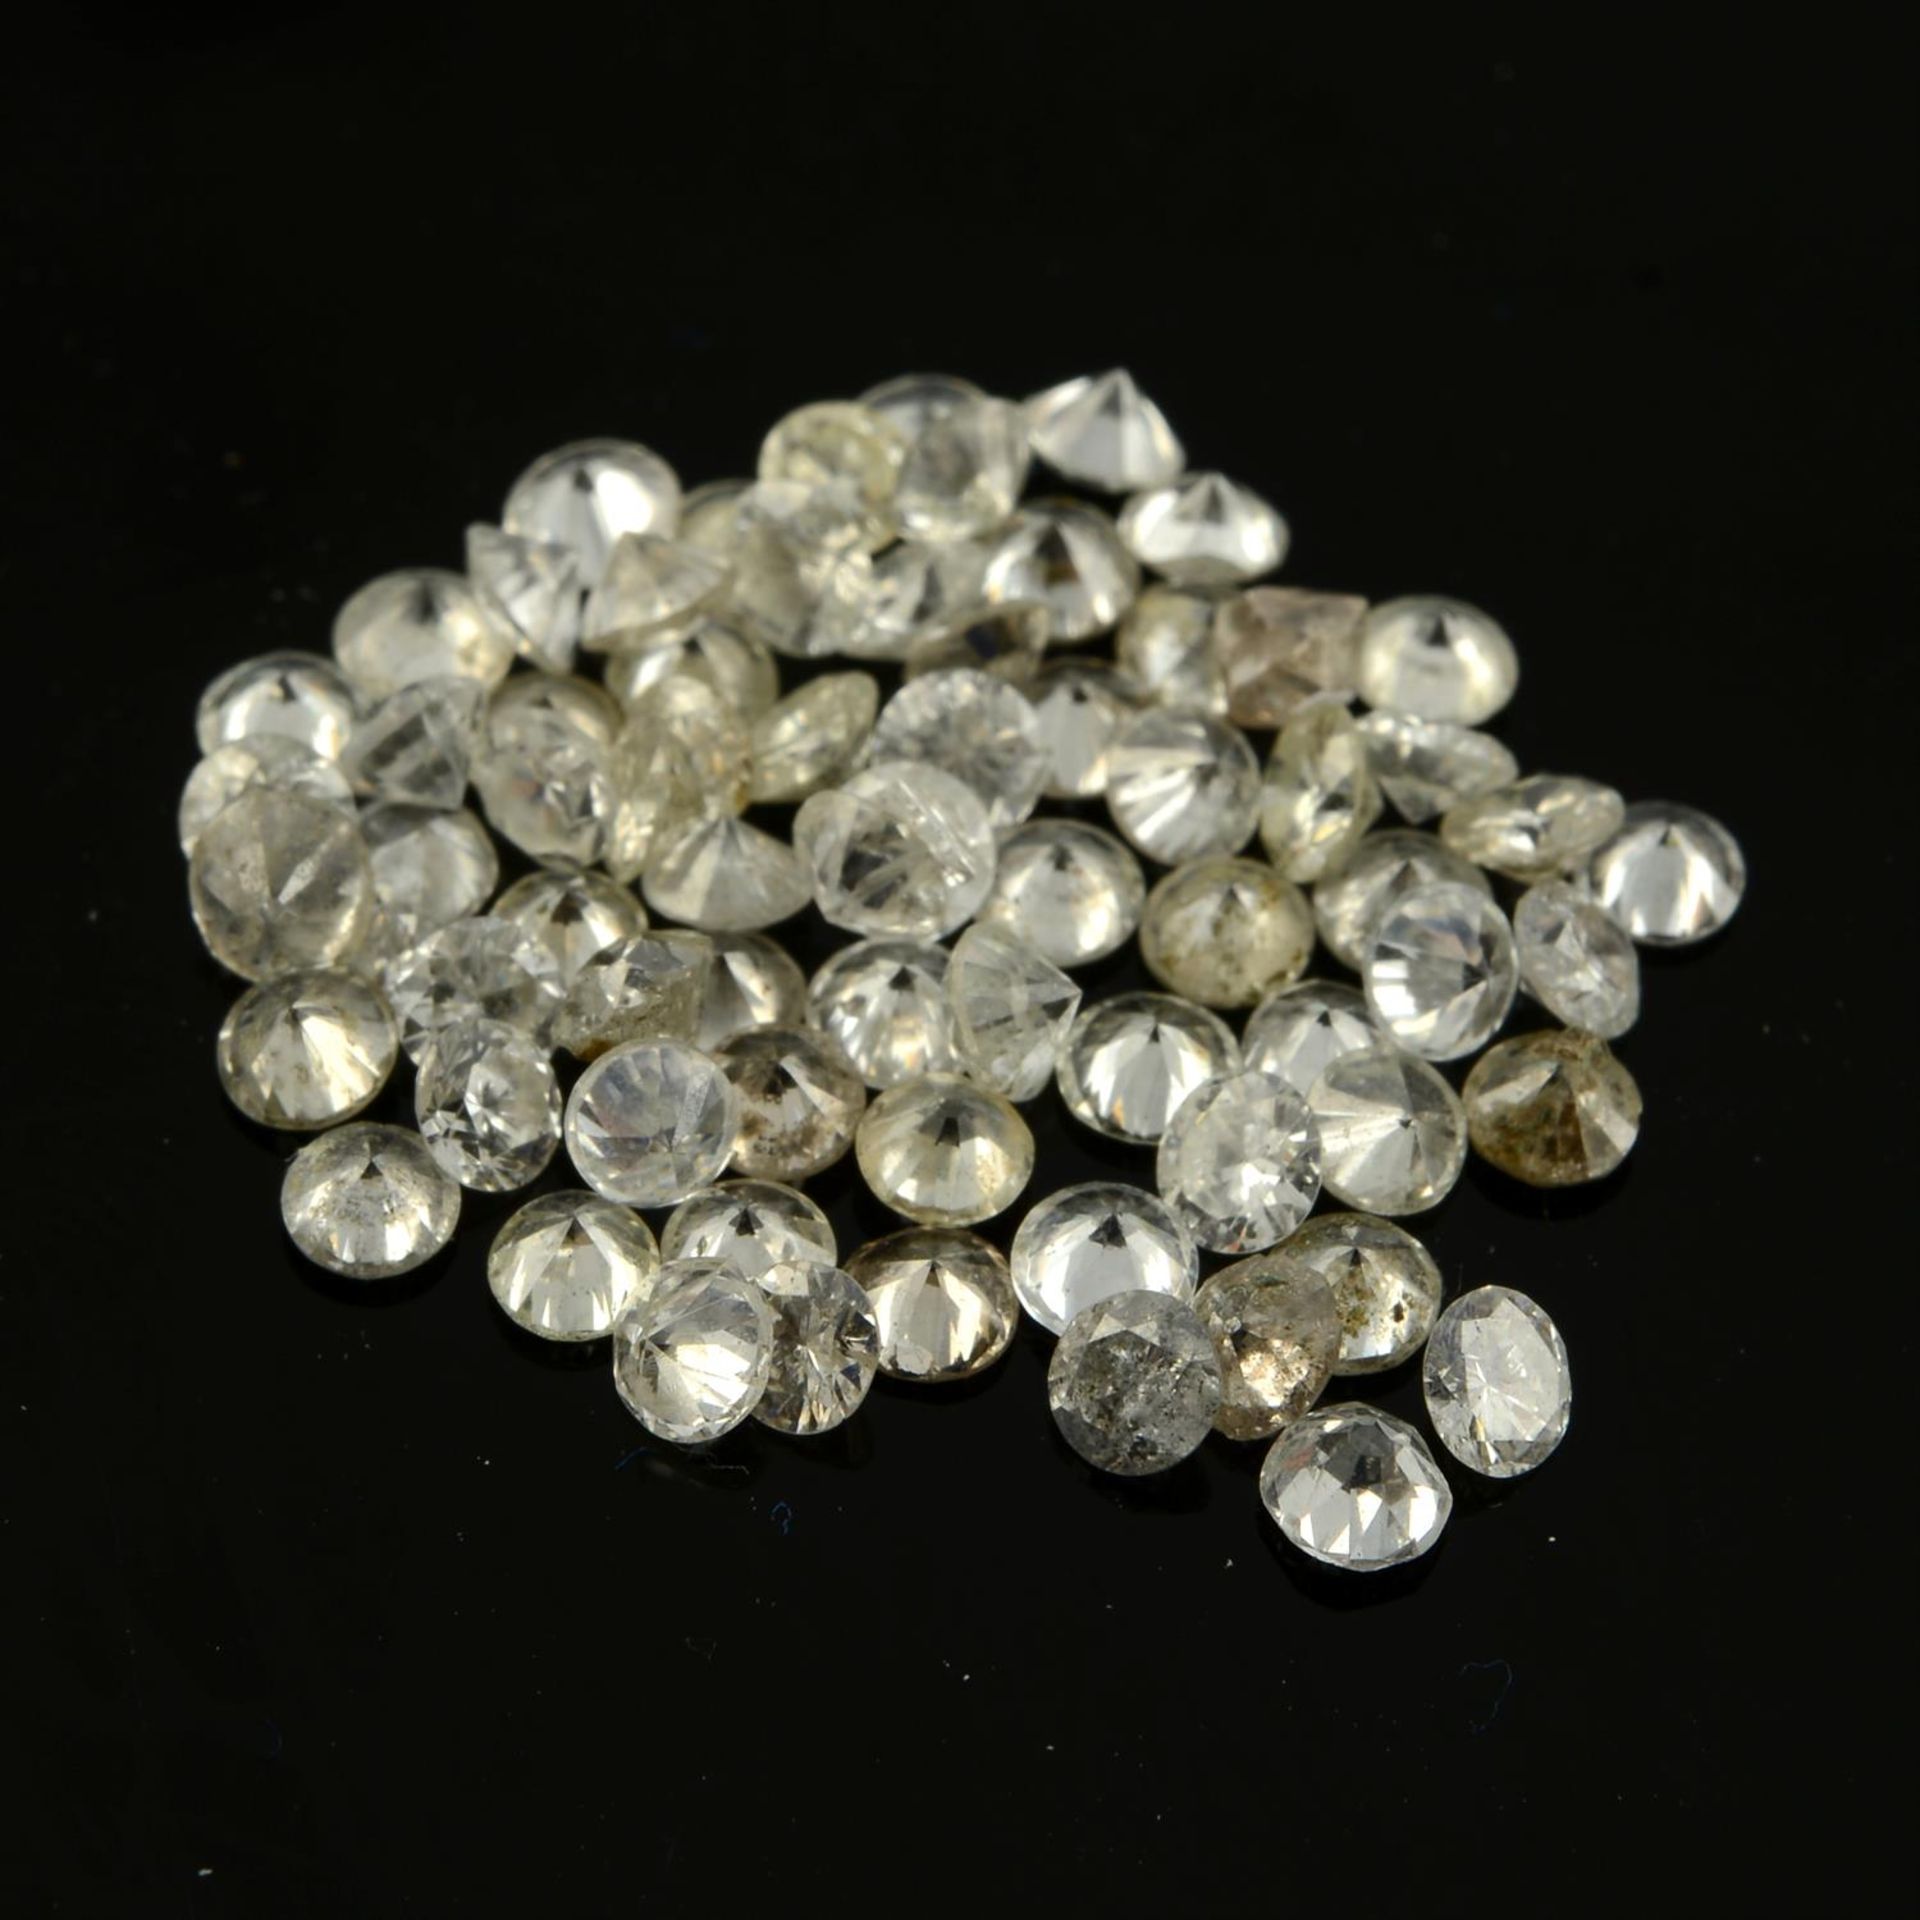 A selection of round briliant-cut diamonds, total weight 6.75cts.